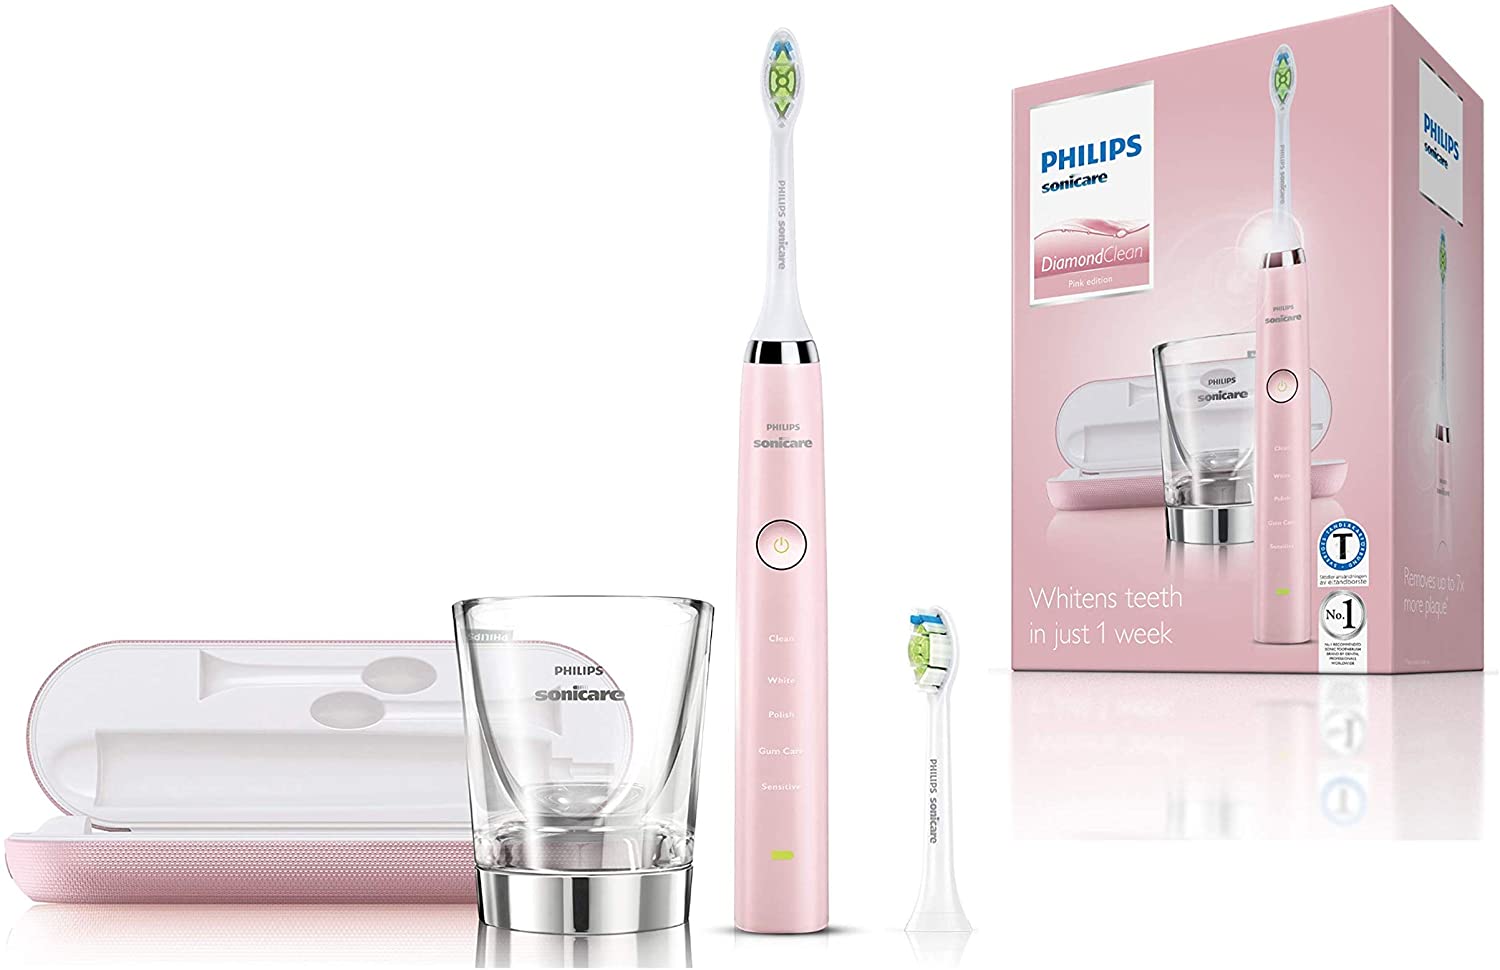 Philips Sonicare DiamondClean Sonic Electric Rechargeable Toothbrush, Pink, HX9362